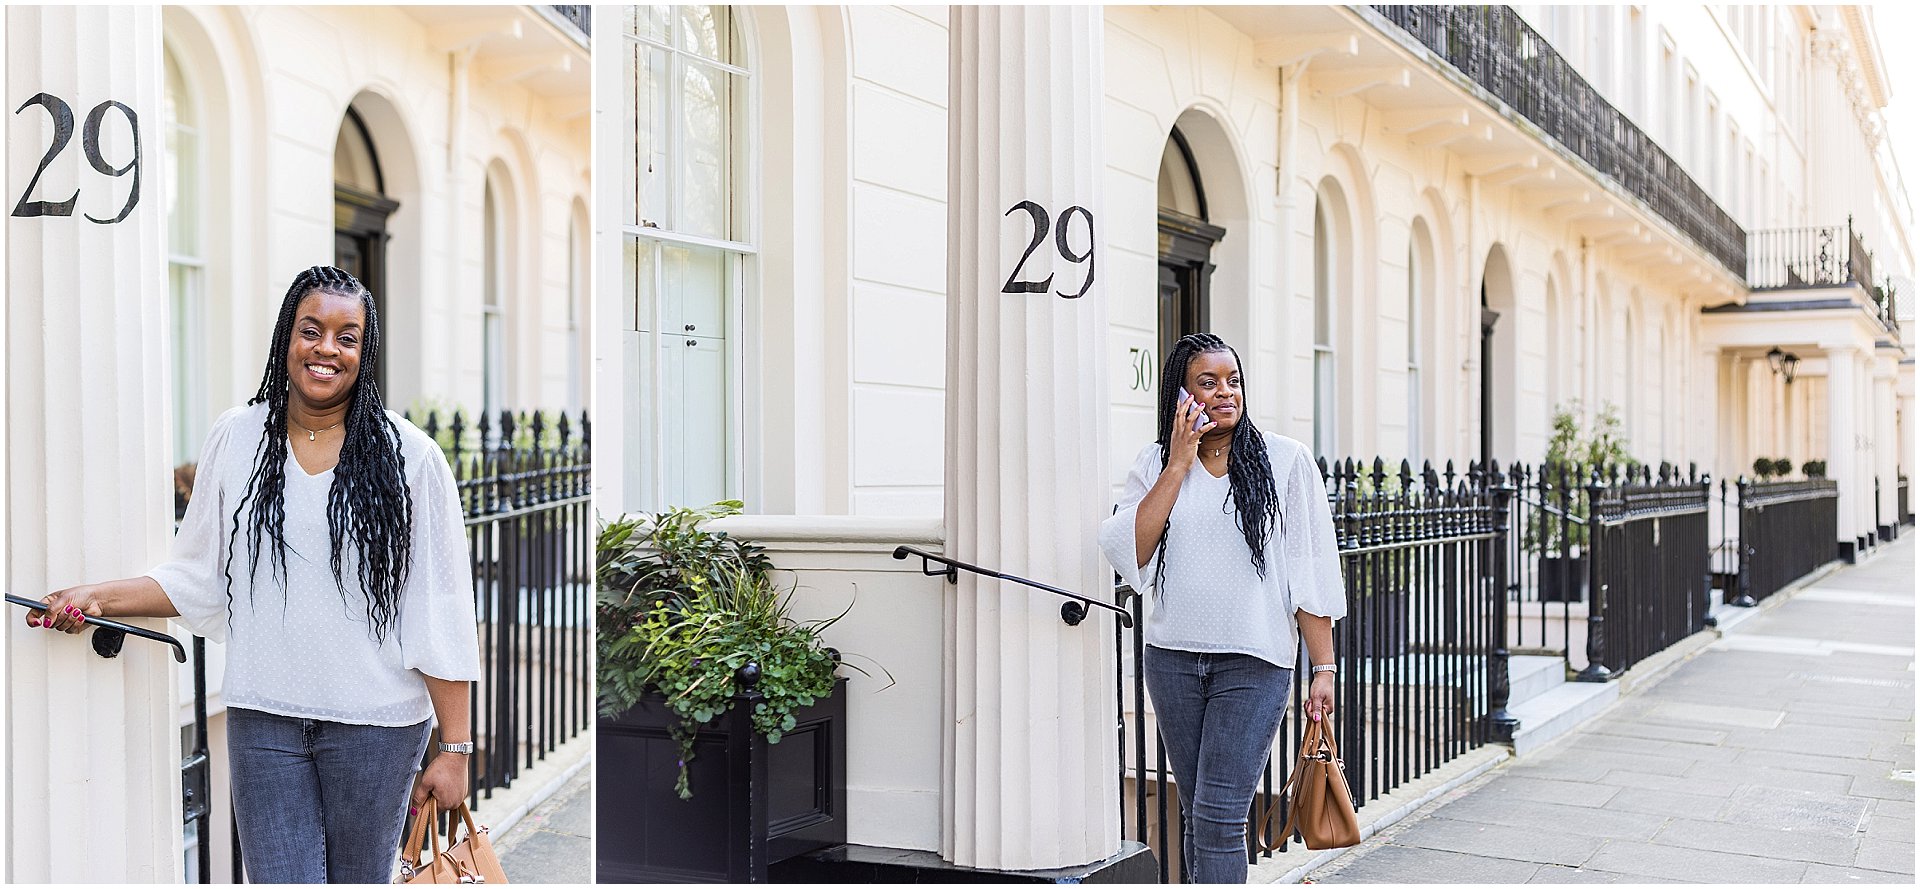 Wedding planner Natasha is walking down a street in London.  She is a black lady wearing jeans and a pink blazer. Mini shoot images by London brand photographer AKP Branding Stories